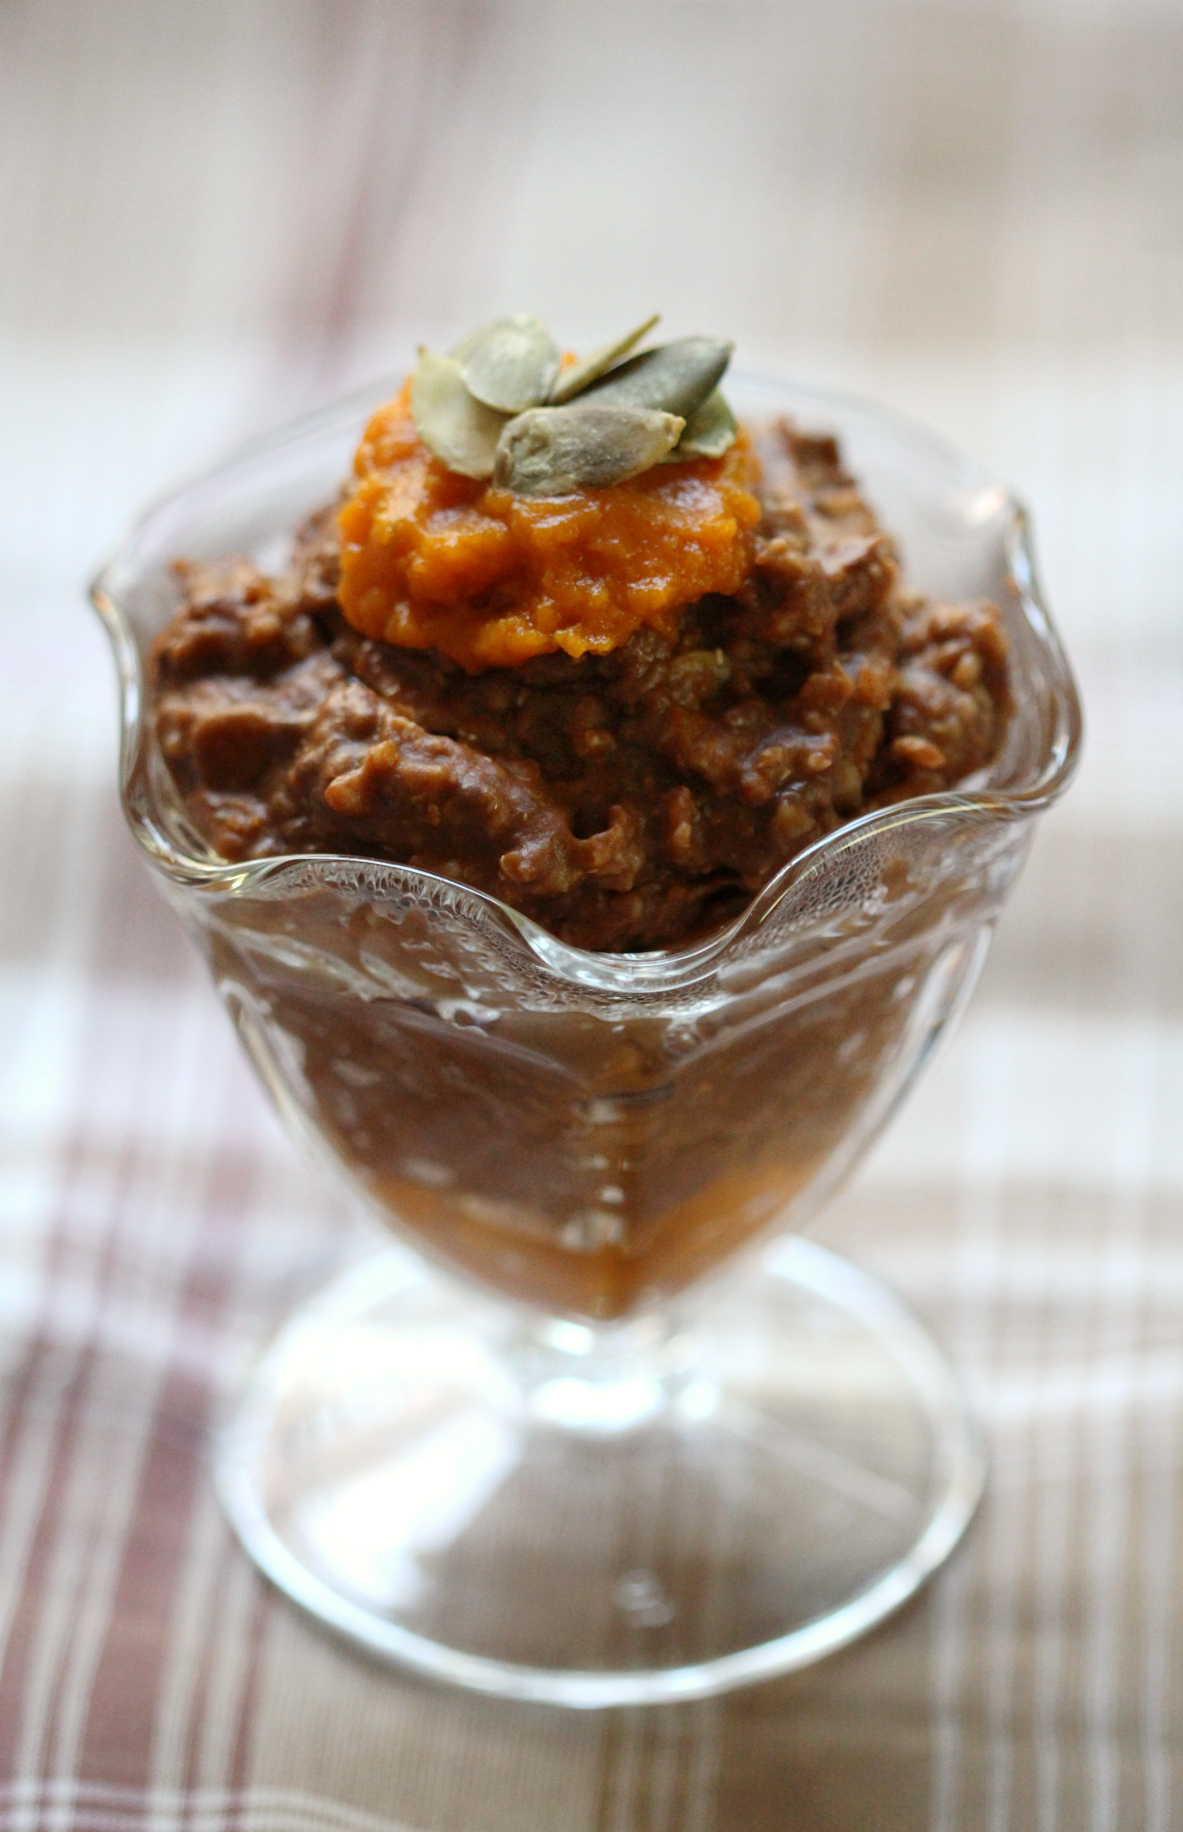 Seedy Chocolate Oatmeal Parfait | Strength and Sunshine @RebeccaGF666 A speedy seedy chocolate pumpkin oatmeal parfait that's gluten-free and vegan. Healthy fats, cocoa, and whole grains make this the perfect comforting breakfast recipe to fuel and start your day with on a chilly morning!